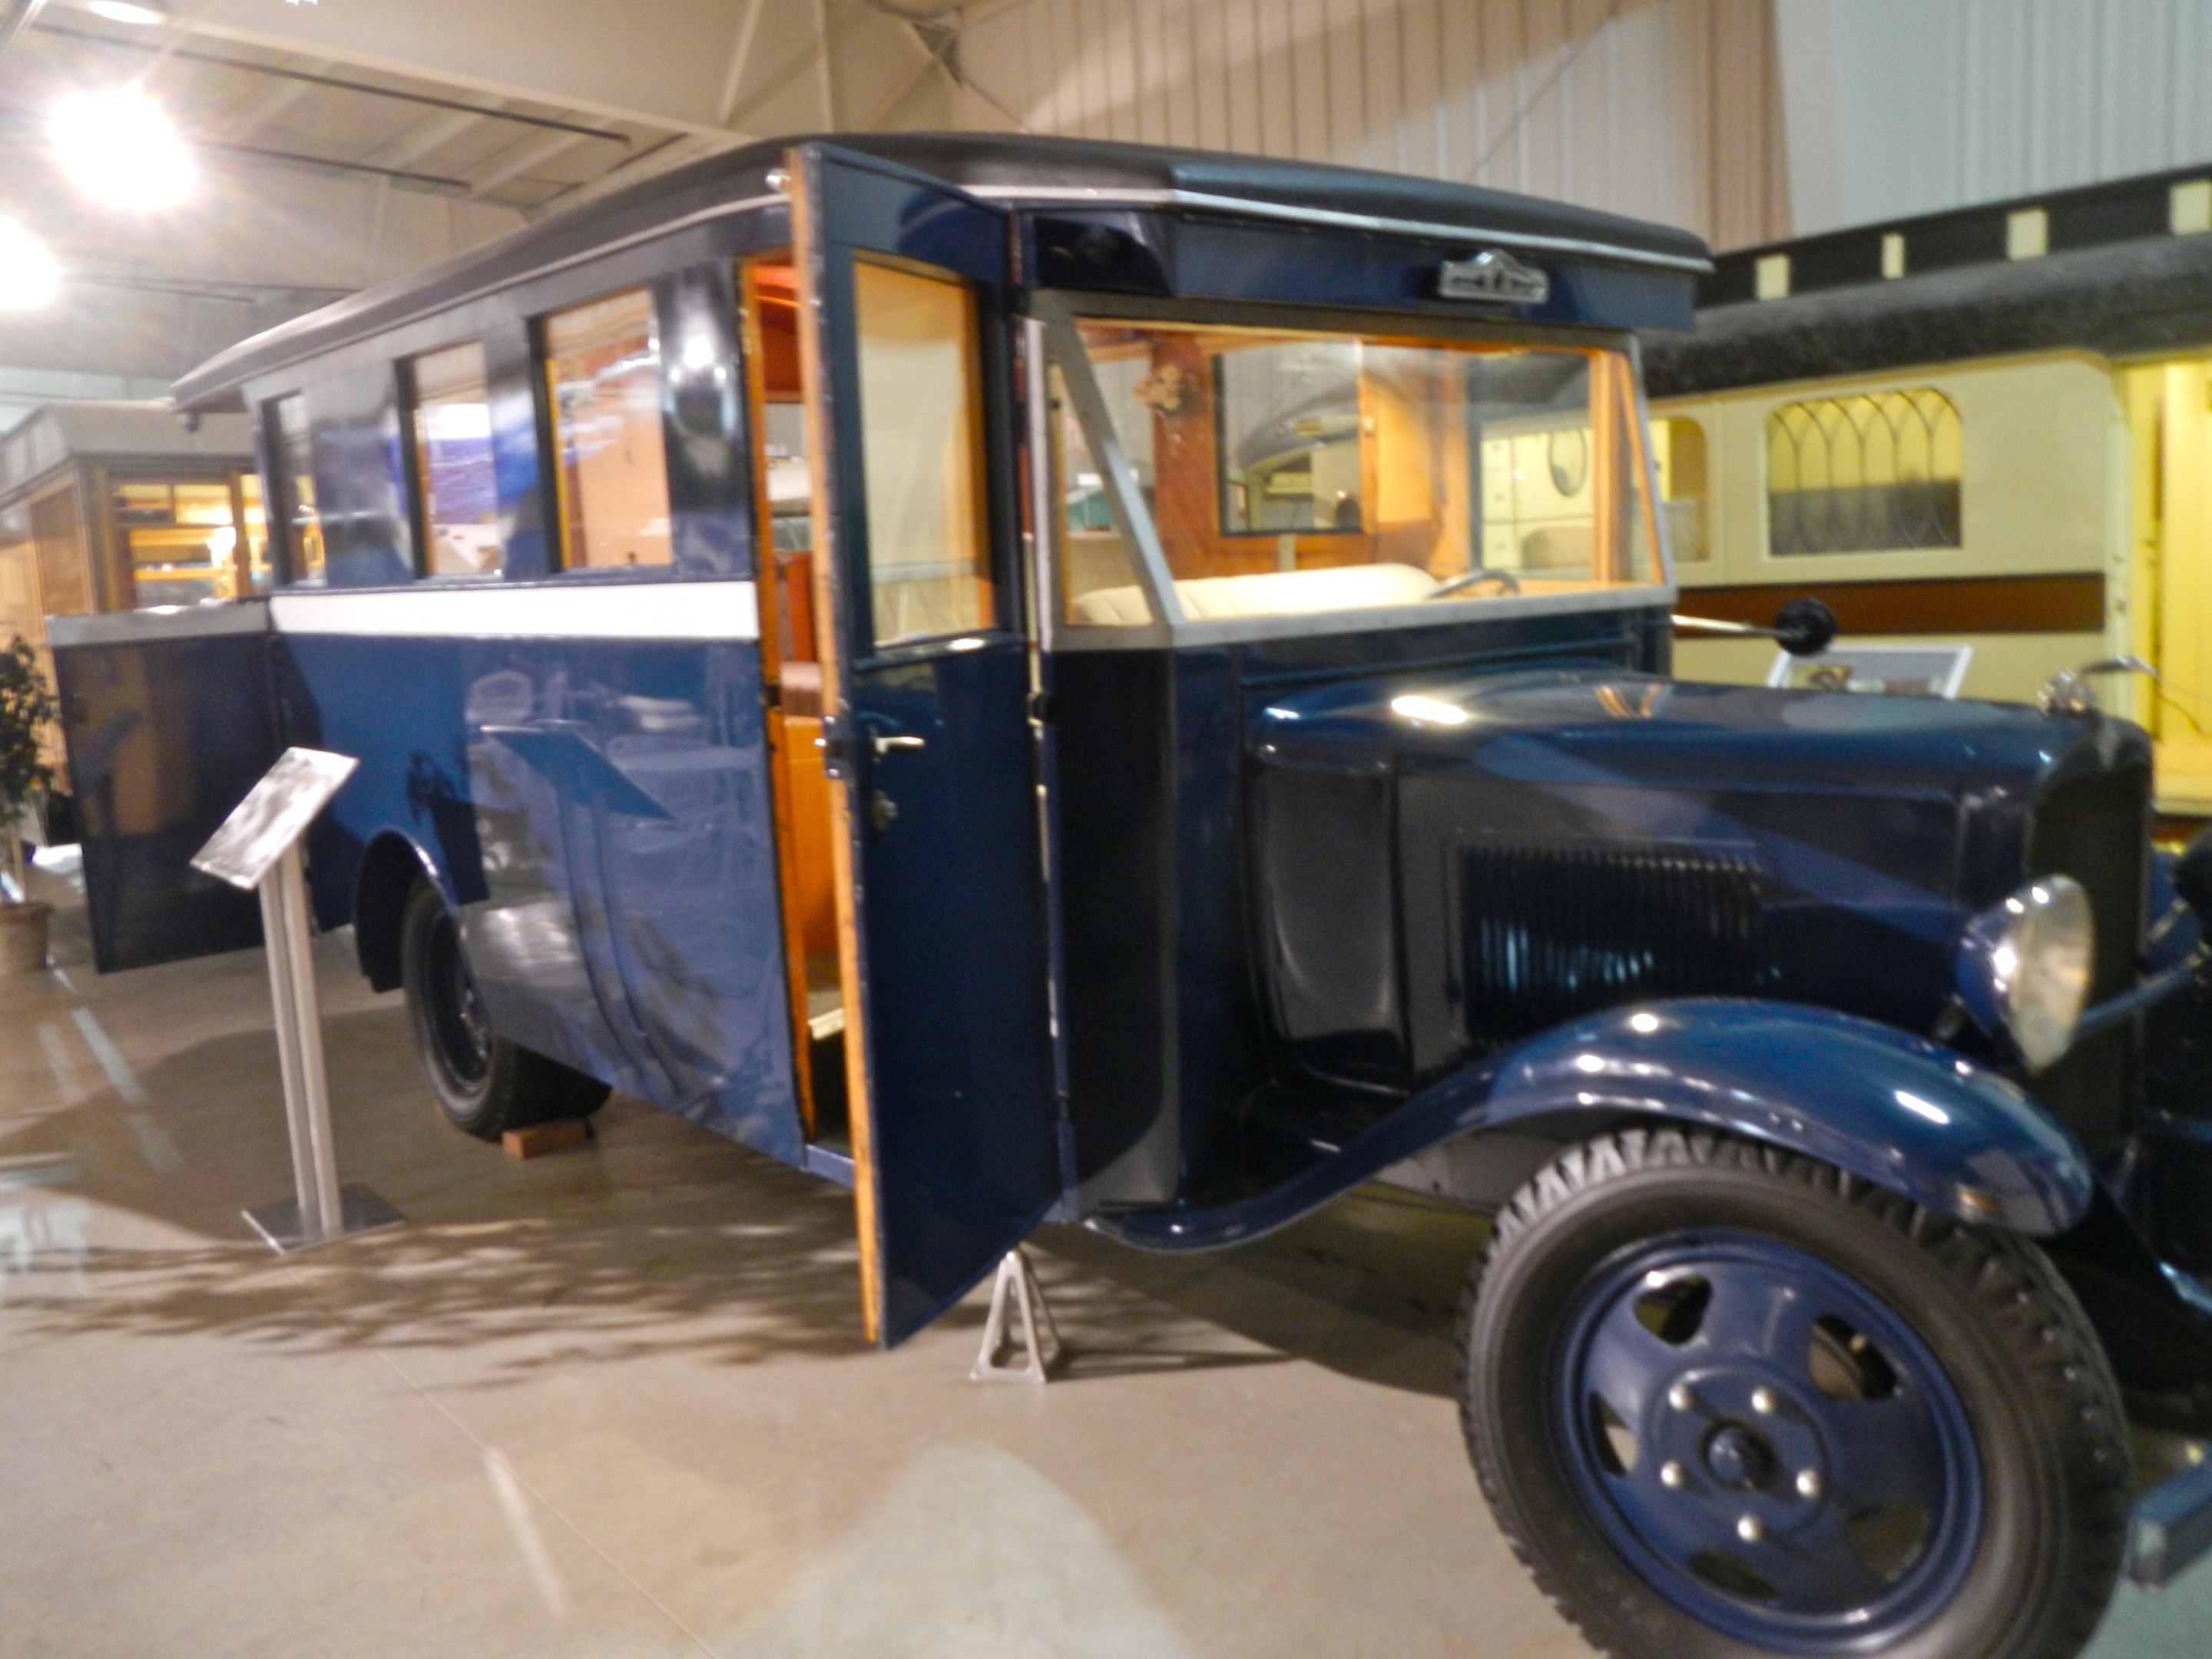 Mae West’s RV (1931). This was one of a very exclusive number of fully integrated motorhomes (then known as 'Housecars' built during the inter-war era.jpg